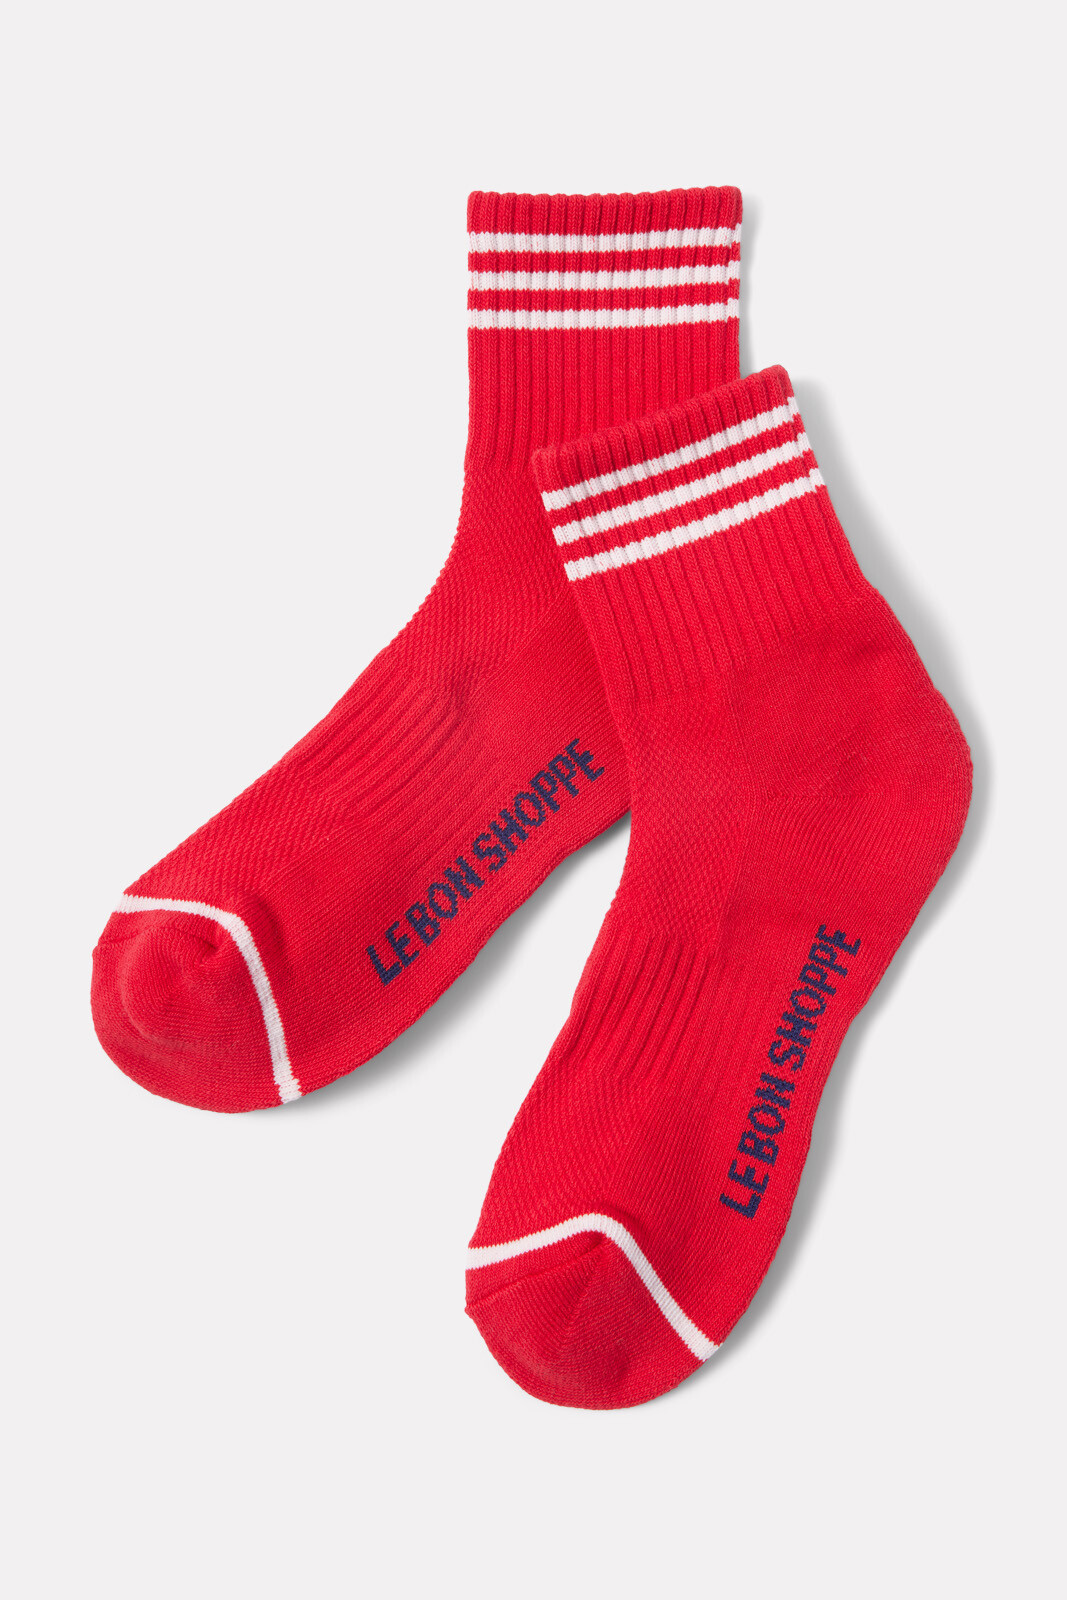 The Boyfriend Sock Red and Blue